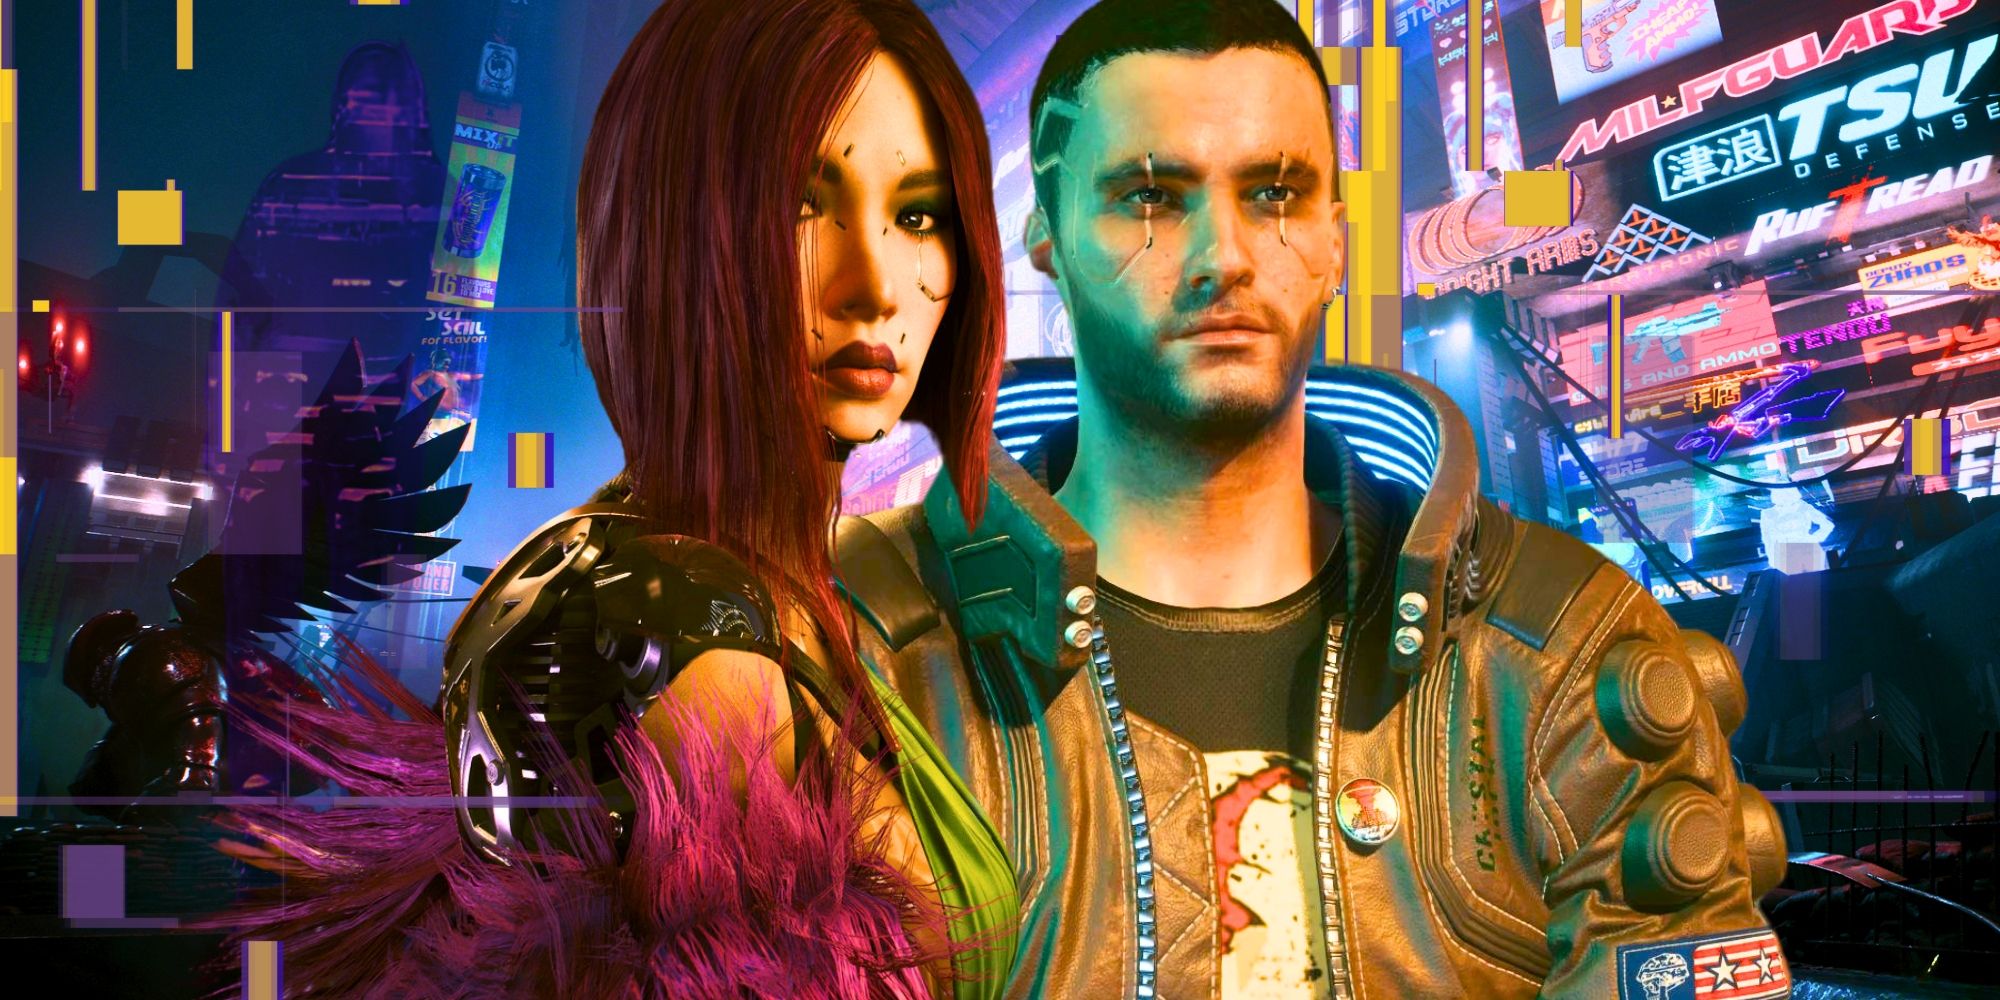 V and Songbird from Cyberpunk 2077 with a ghostly figure in the background.